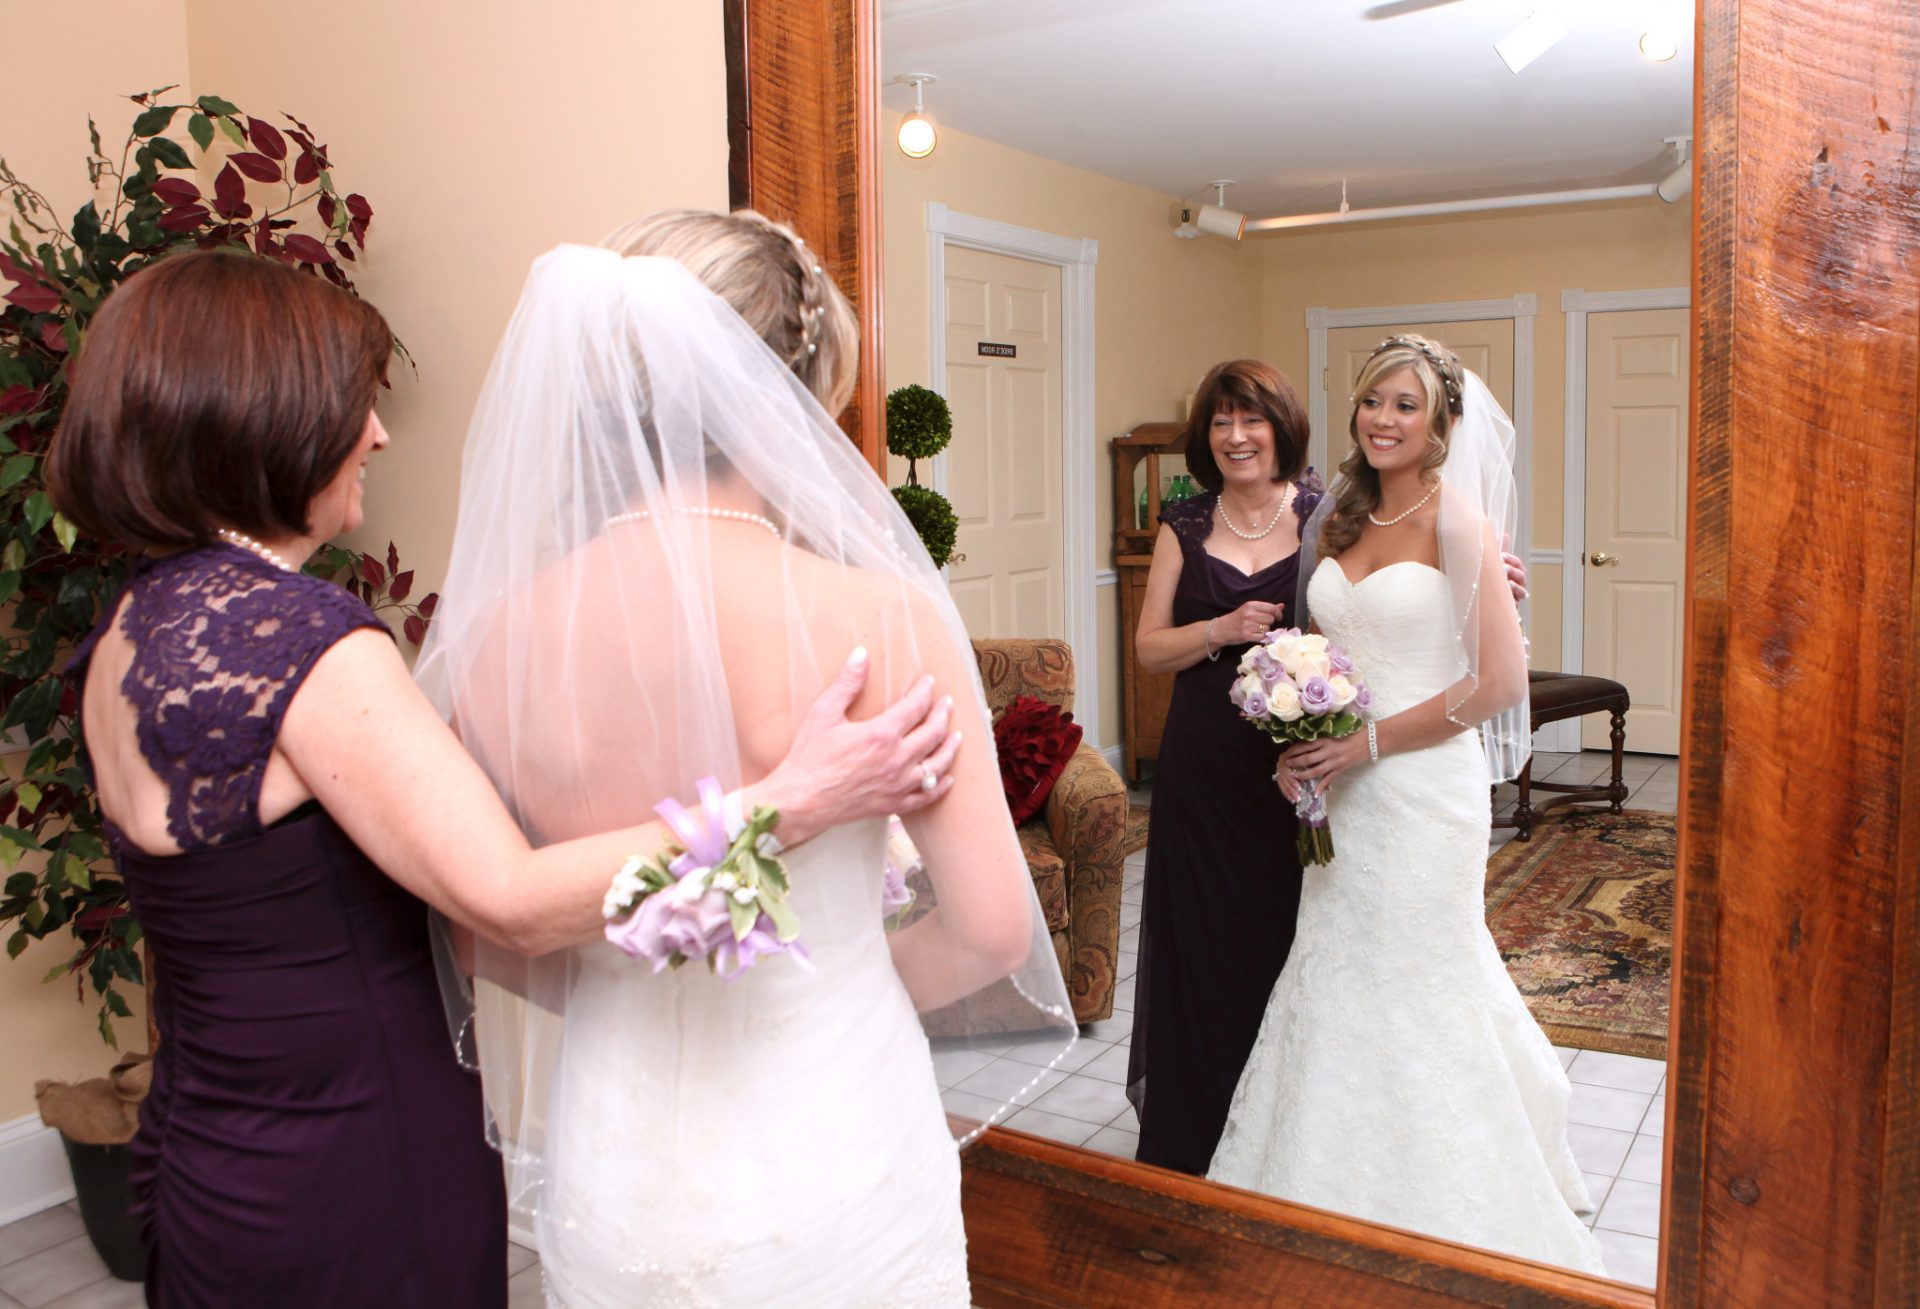 Bride and mother of bride embrace in front of large mirror in the bride's room